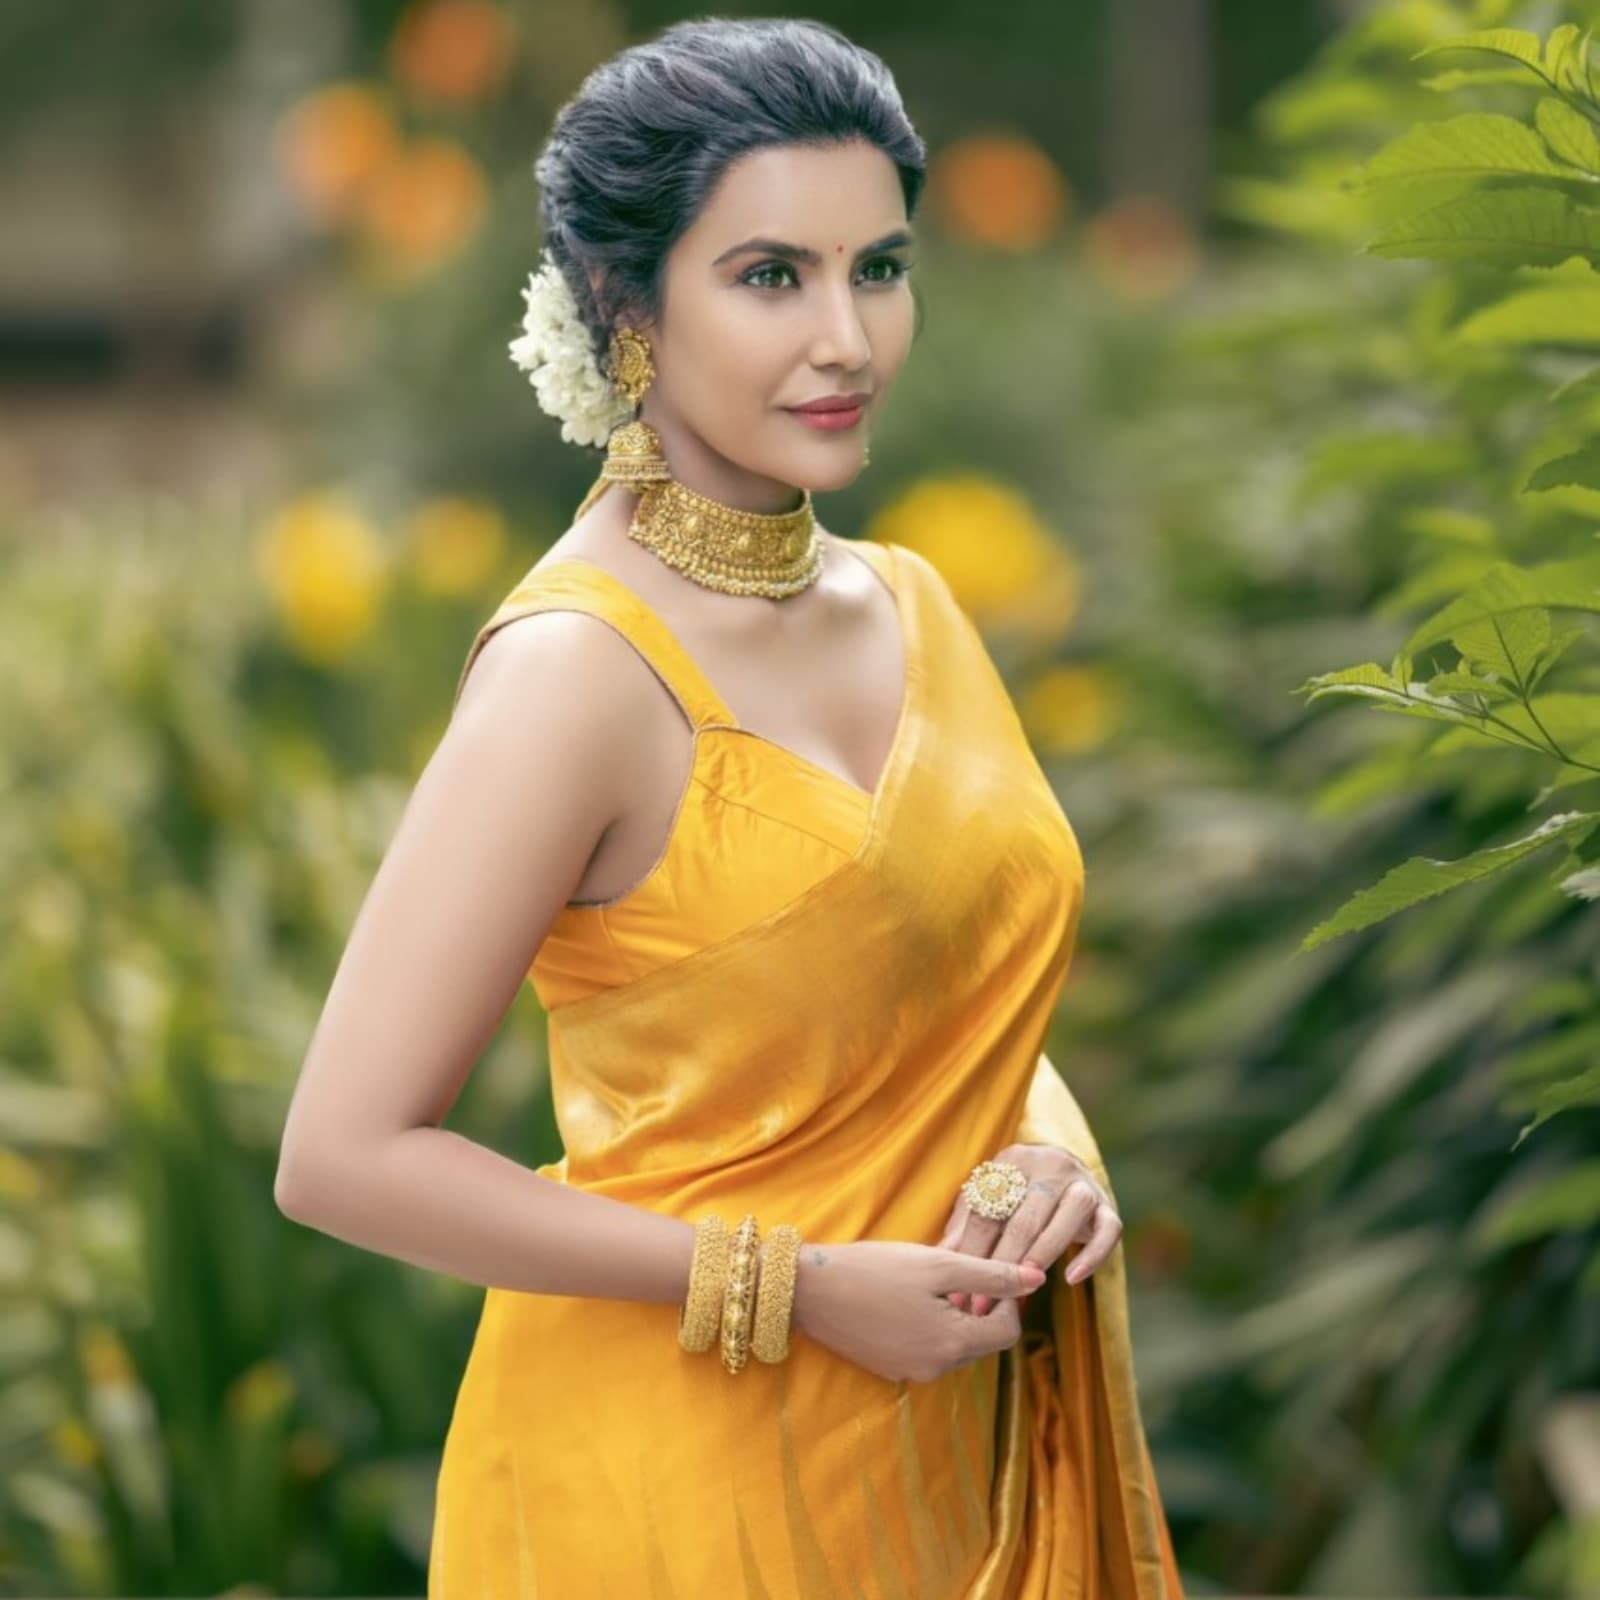 In Yellow Saree, Tamil Actress Priya Anand Looks Drop-Dead Gorgeous; Fans  React - News18